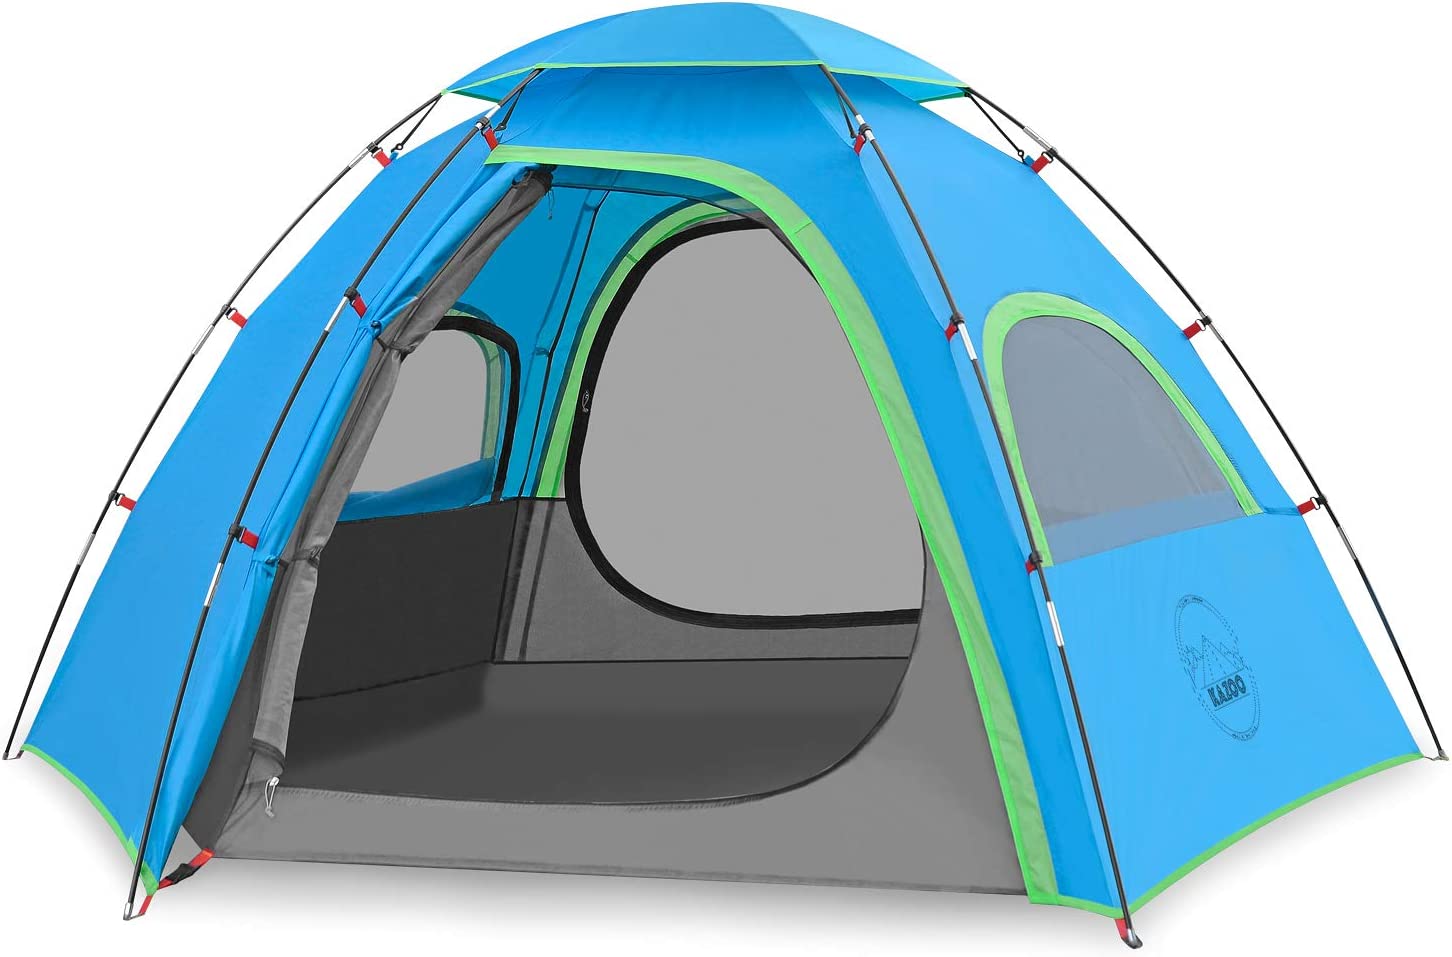 KAZOO Outdoor Camping Tent 2/4 Person Waterproof Camping Tents Easy Setup Two/Four Man Tent Sun Shade 2/3/4 People